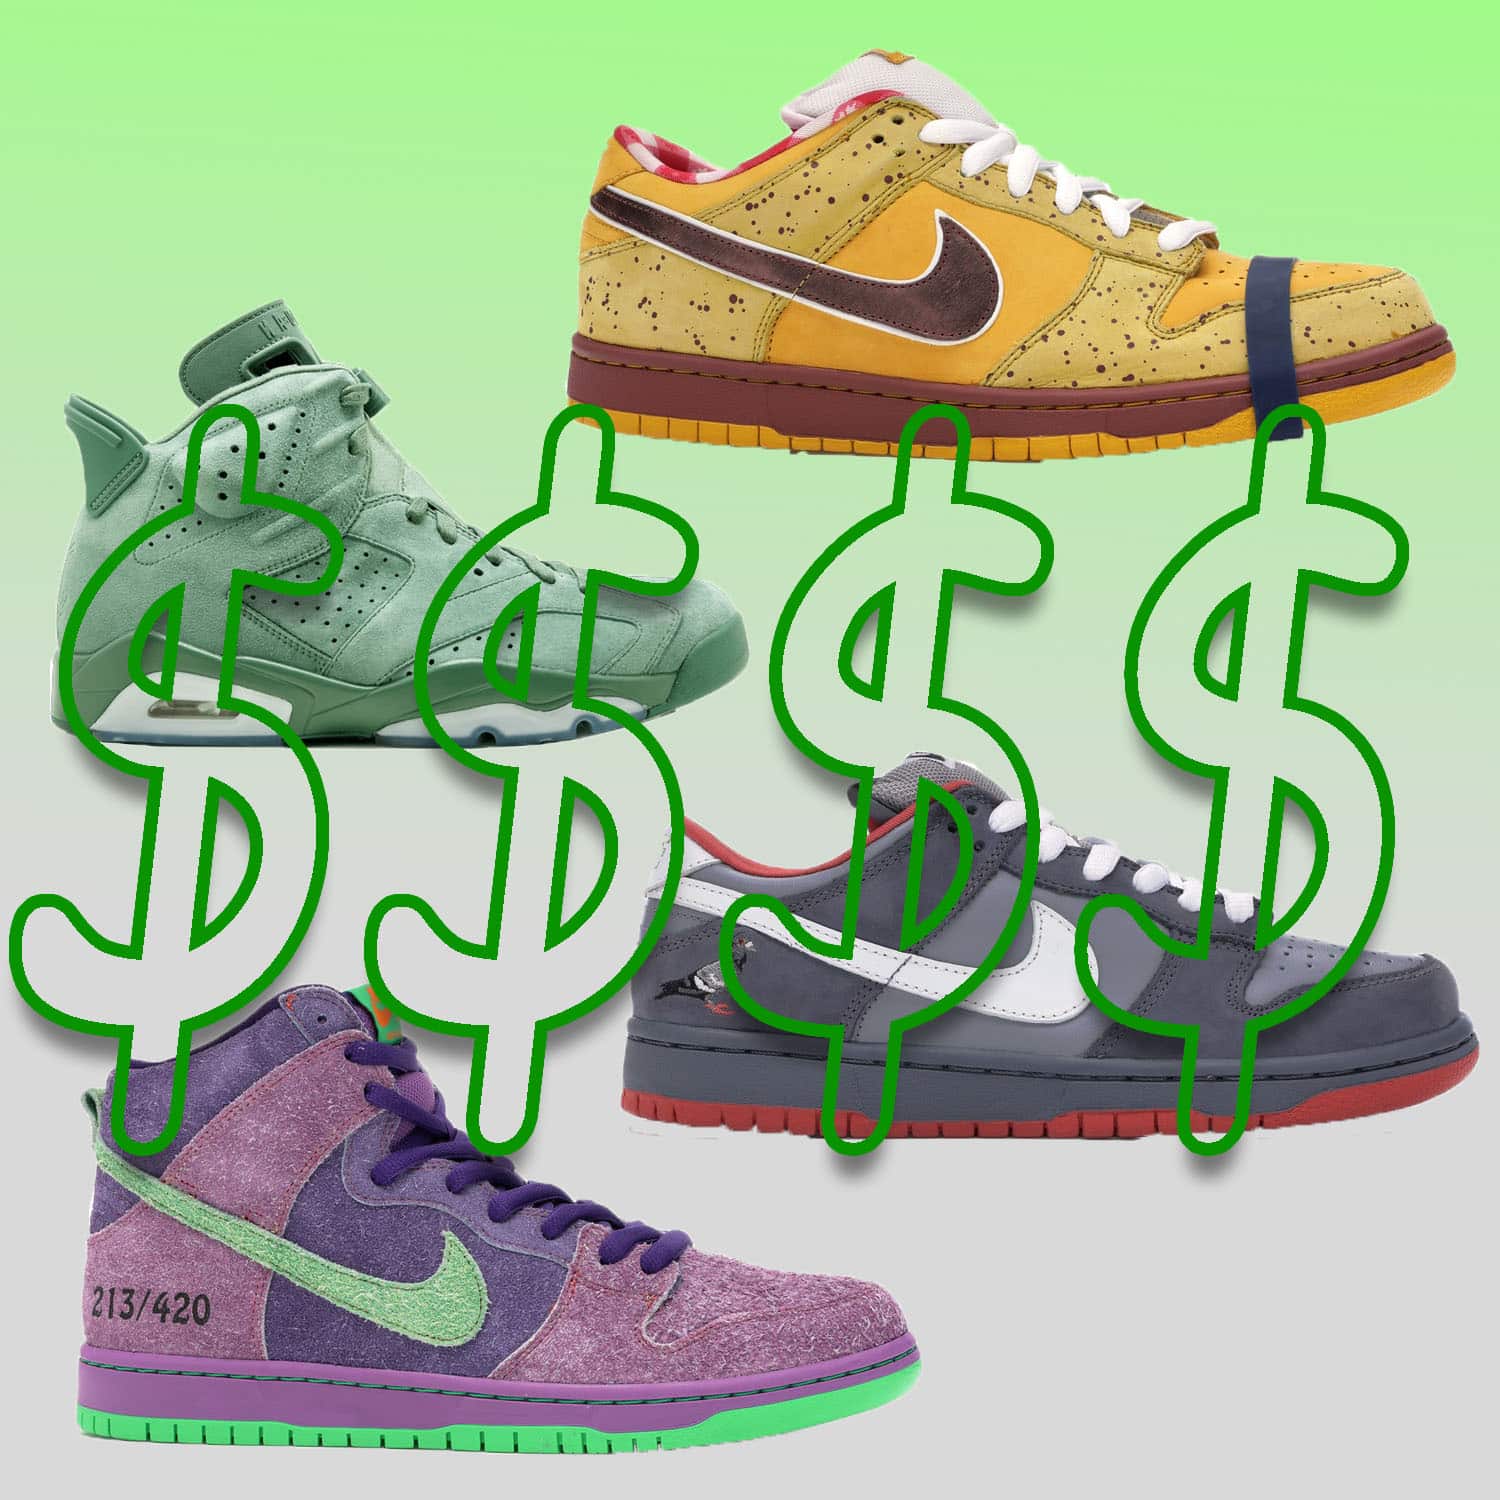 20 Most Expensive Sneakers for Resale 2020